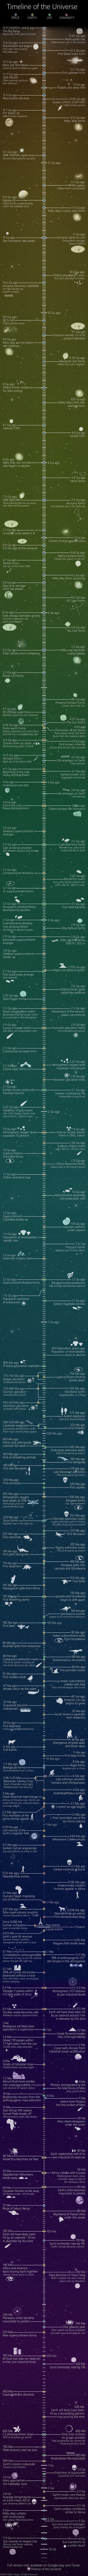 timeline of the universe infographic